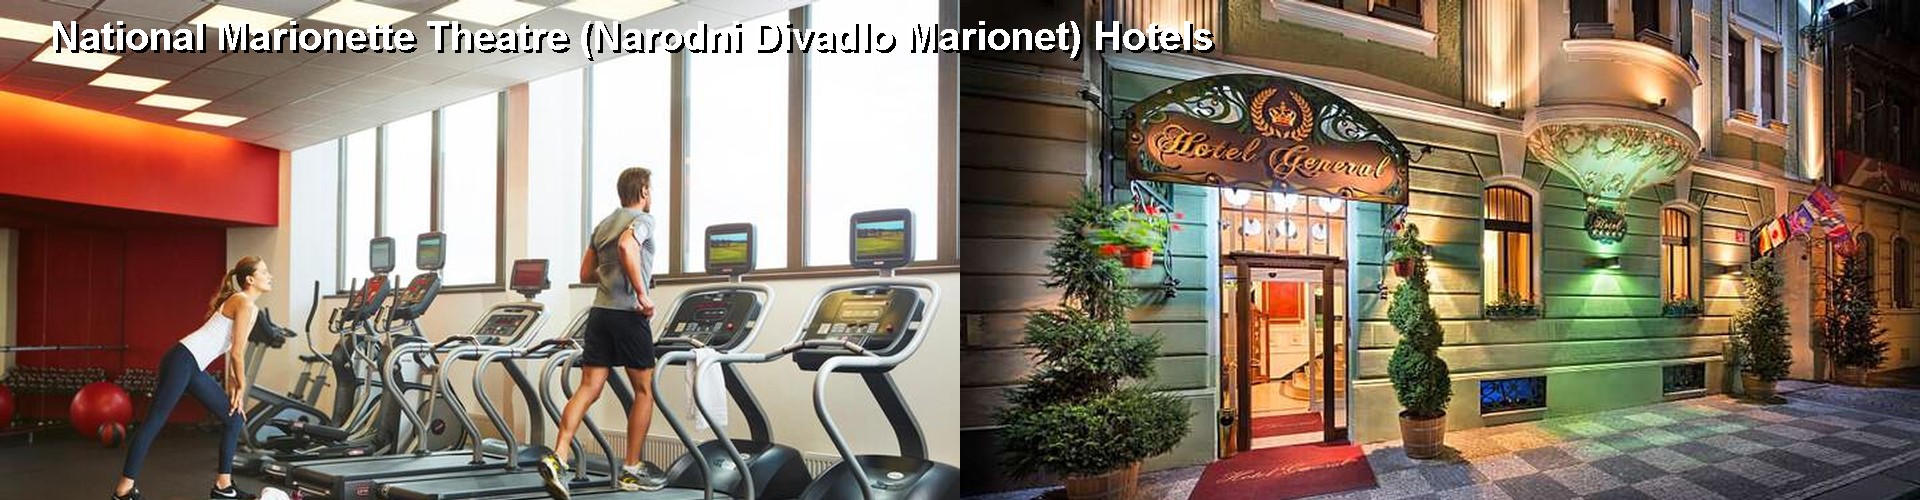 5 Best Hotels near National Marionette Theatre (Narodni Divadlo Marionet)